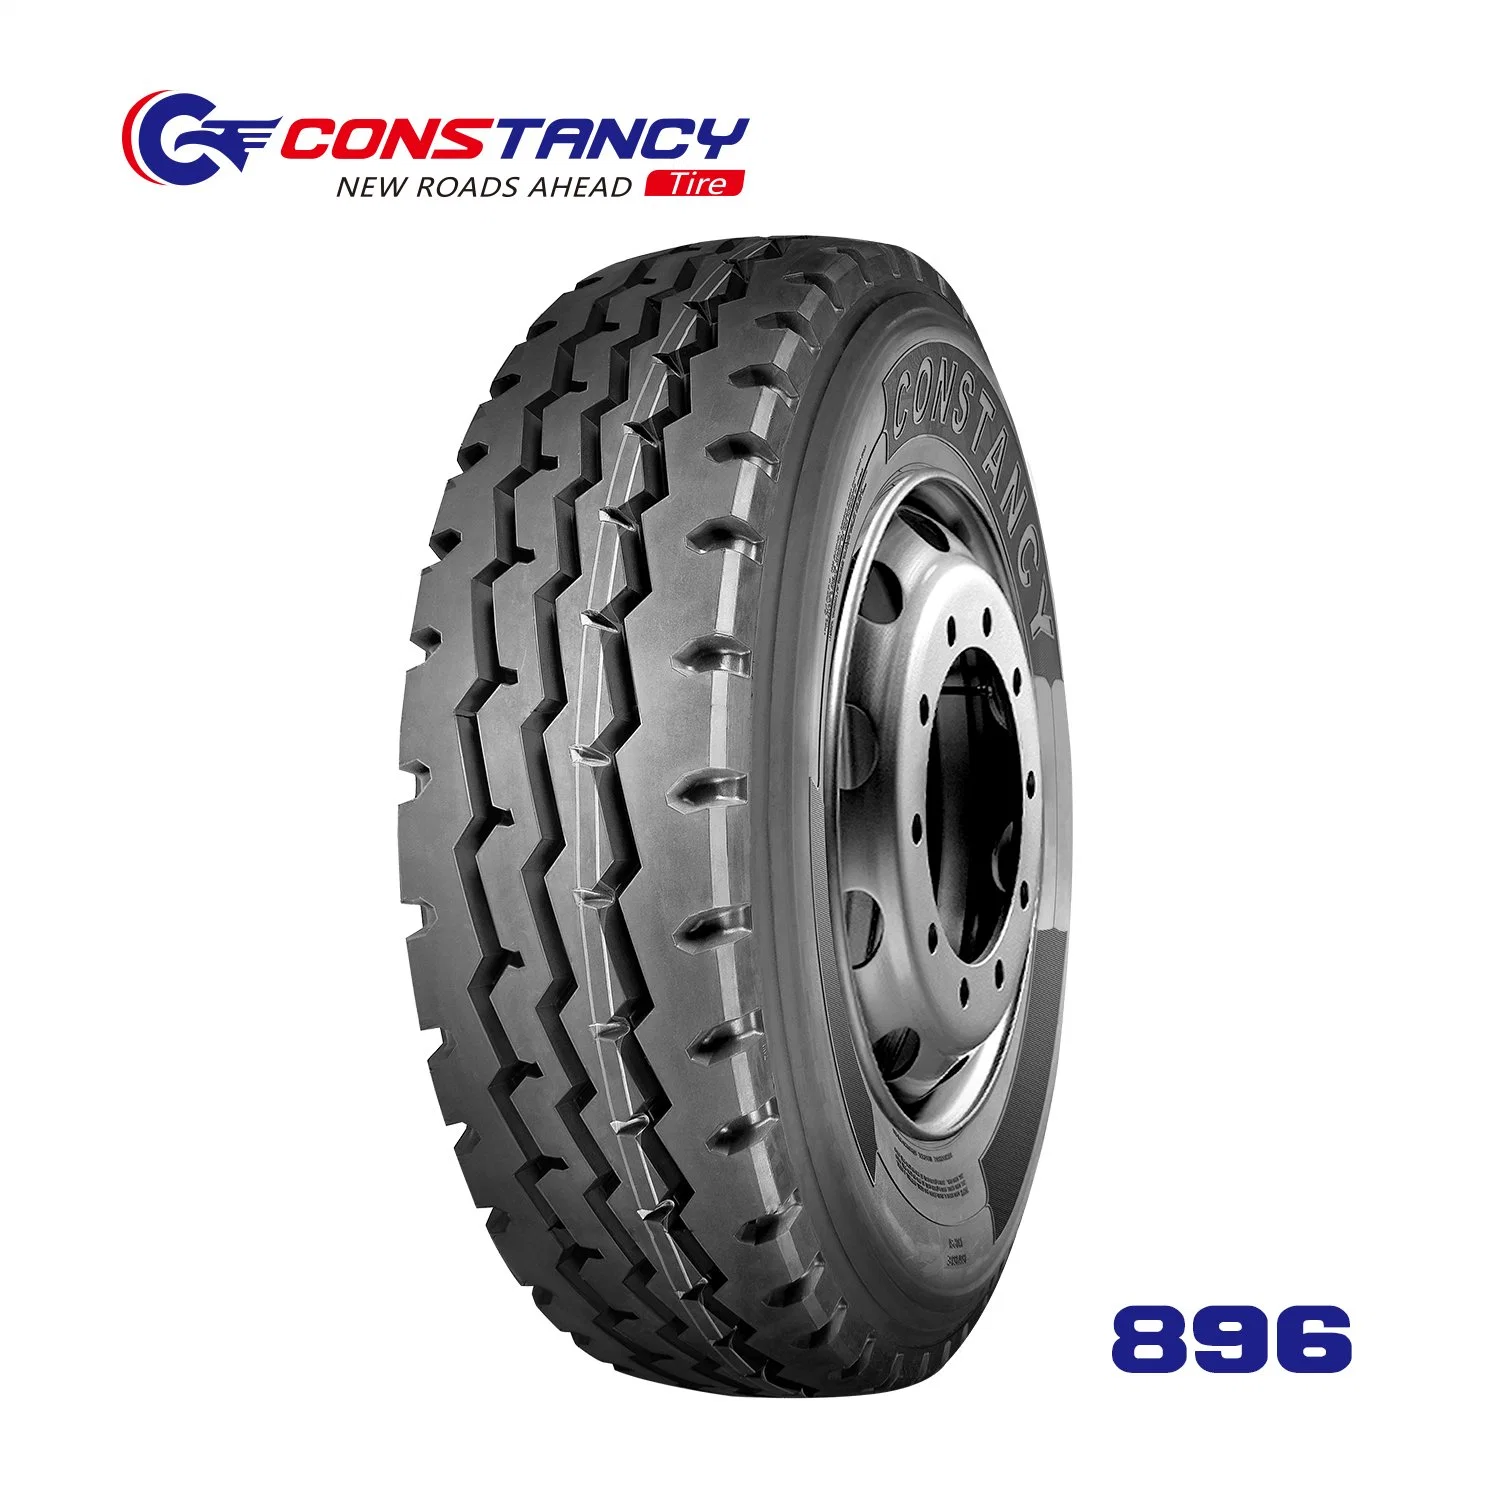 Radial Truck Tyres/Tyres with 5-Year Warranty (9.00R20)